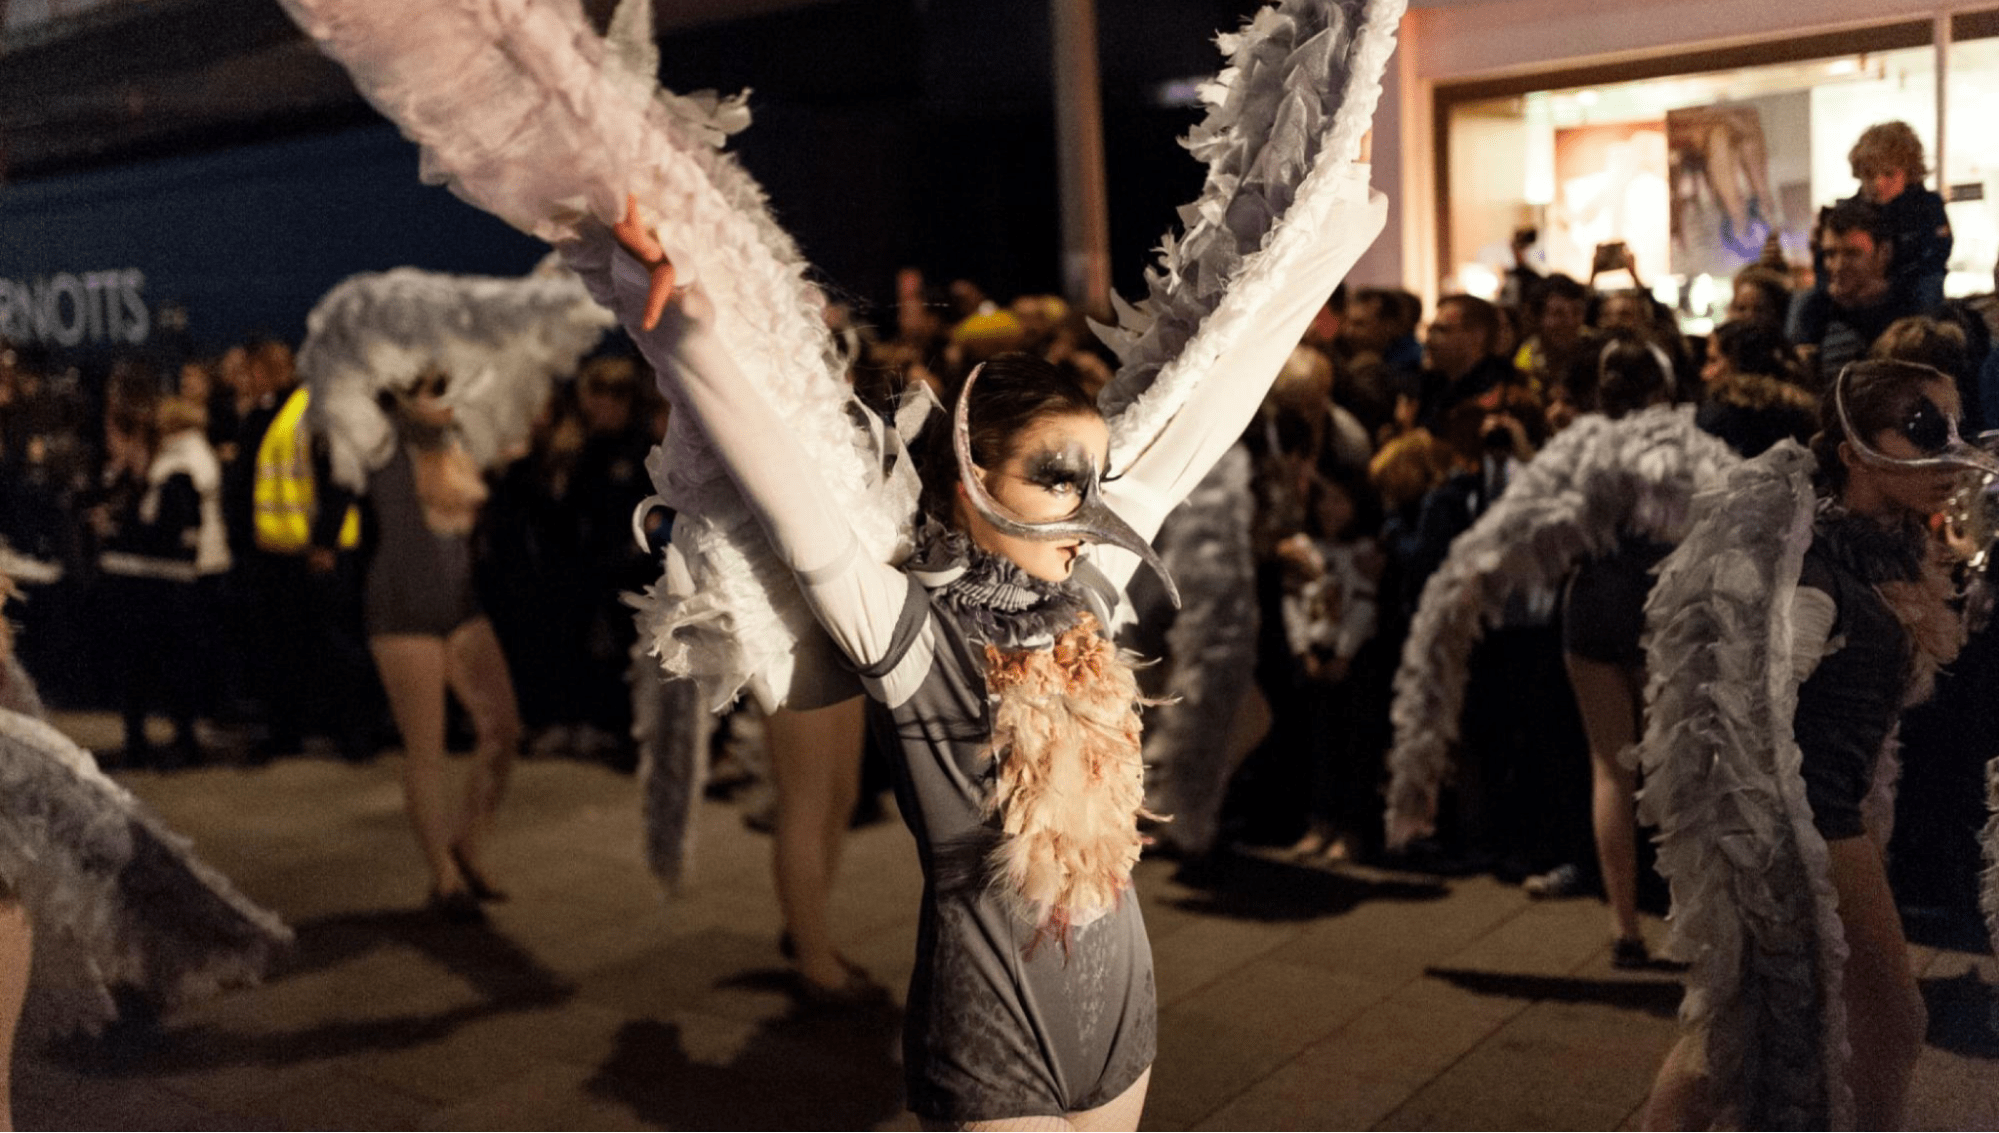 A woman dressed as a bird in a Halloween parade